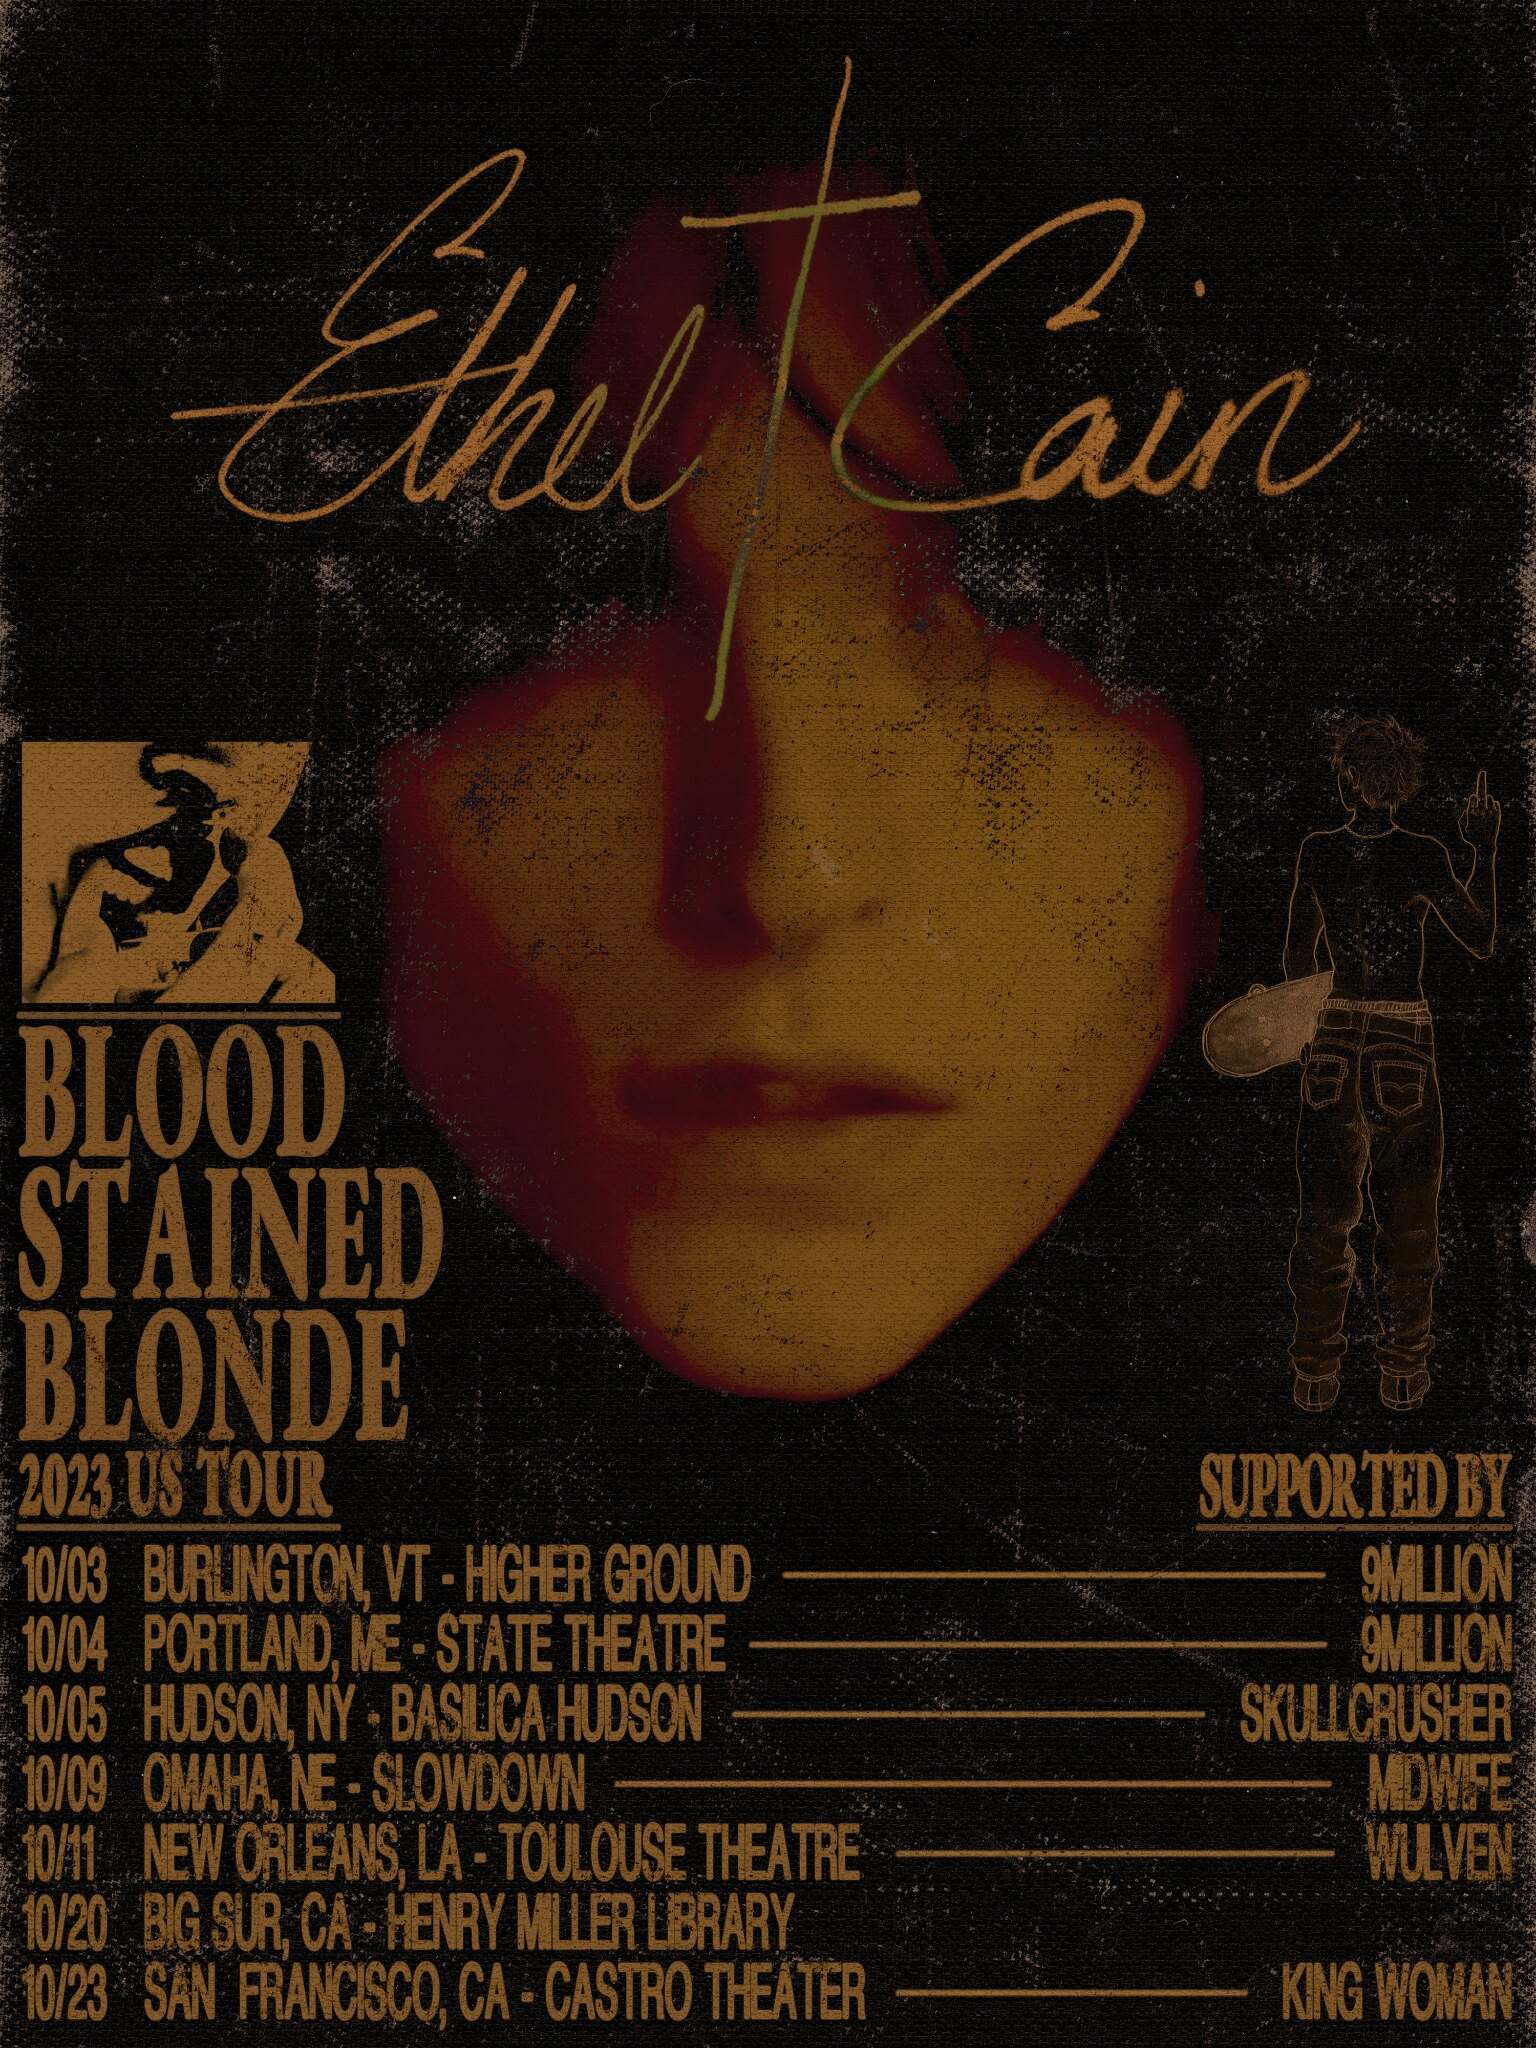 Ethel Cain Blood Stained Blonde Tour flyer 2023